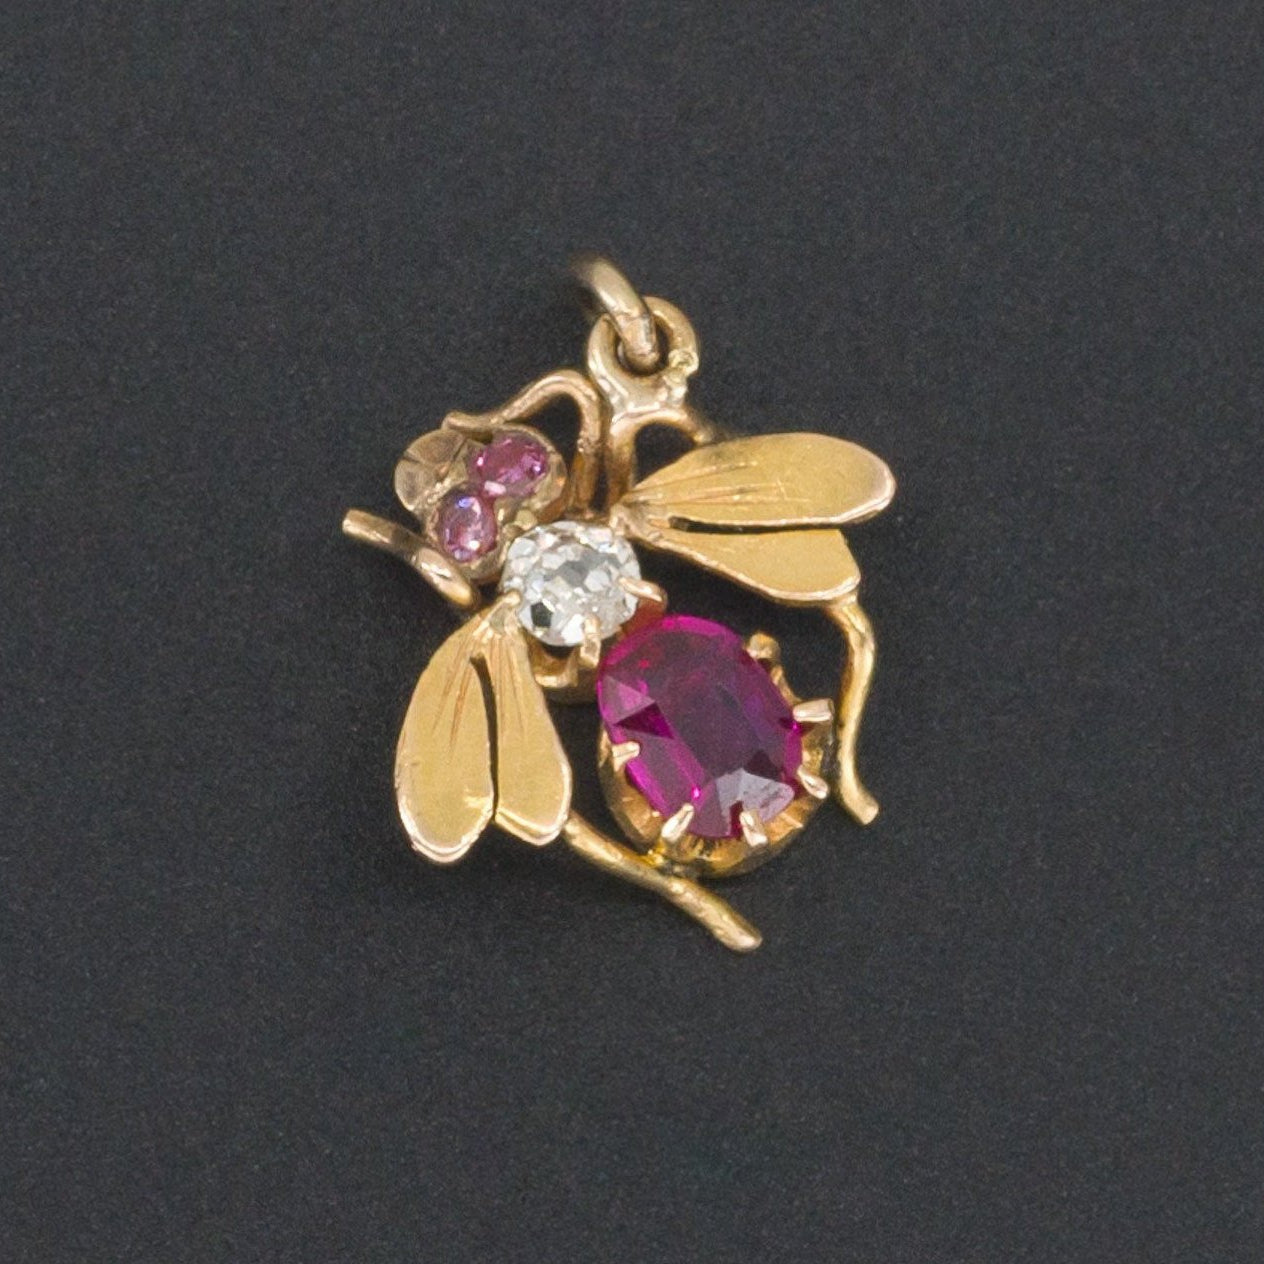 Insect Charm | Vintage Bug or Fly Charm | 14k Gold Ruby & Diamond Charm | Pin Conversion | 14k Gold Charm